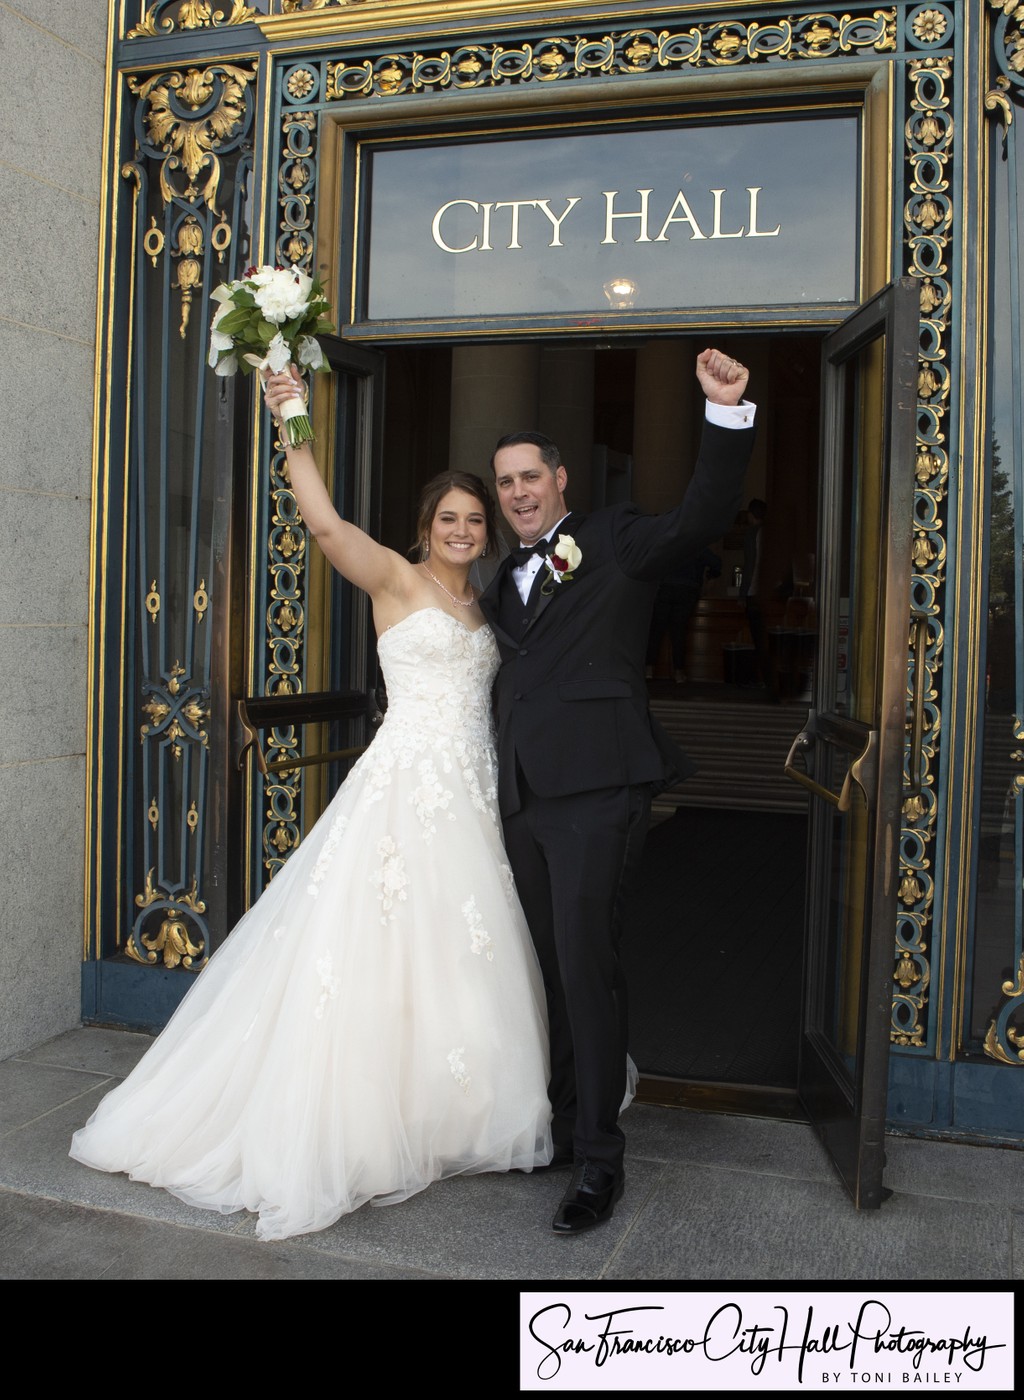 Newlyweds celebrate their recent marriage at San Francisco city hall - photographer